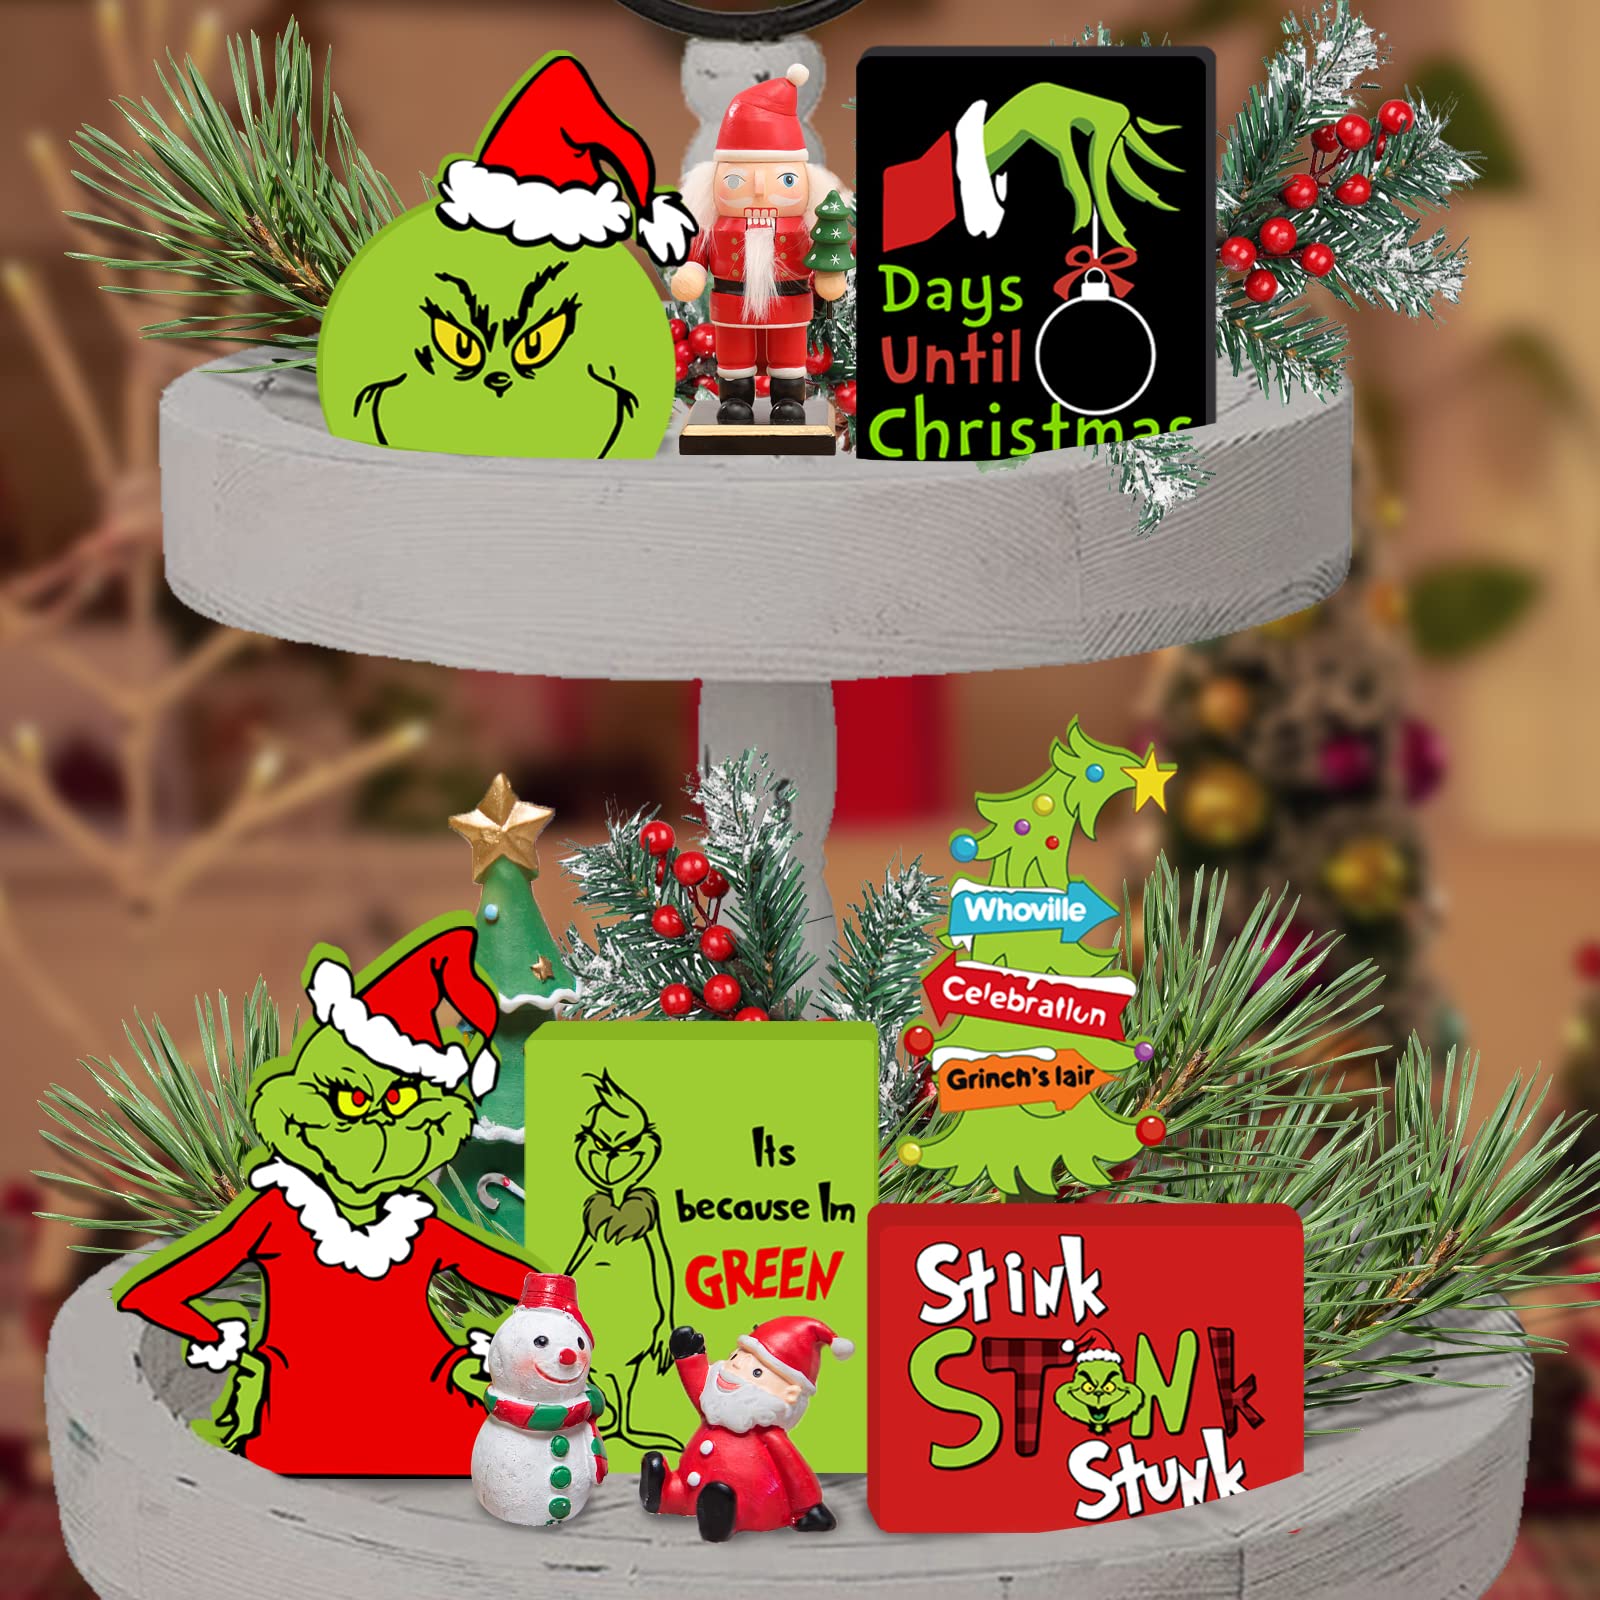 Christmas Tiered Tray Decorations - 6pcs Wooden Signs Table Centerpieces for Holiday Indoor Home Table Top Decorations